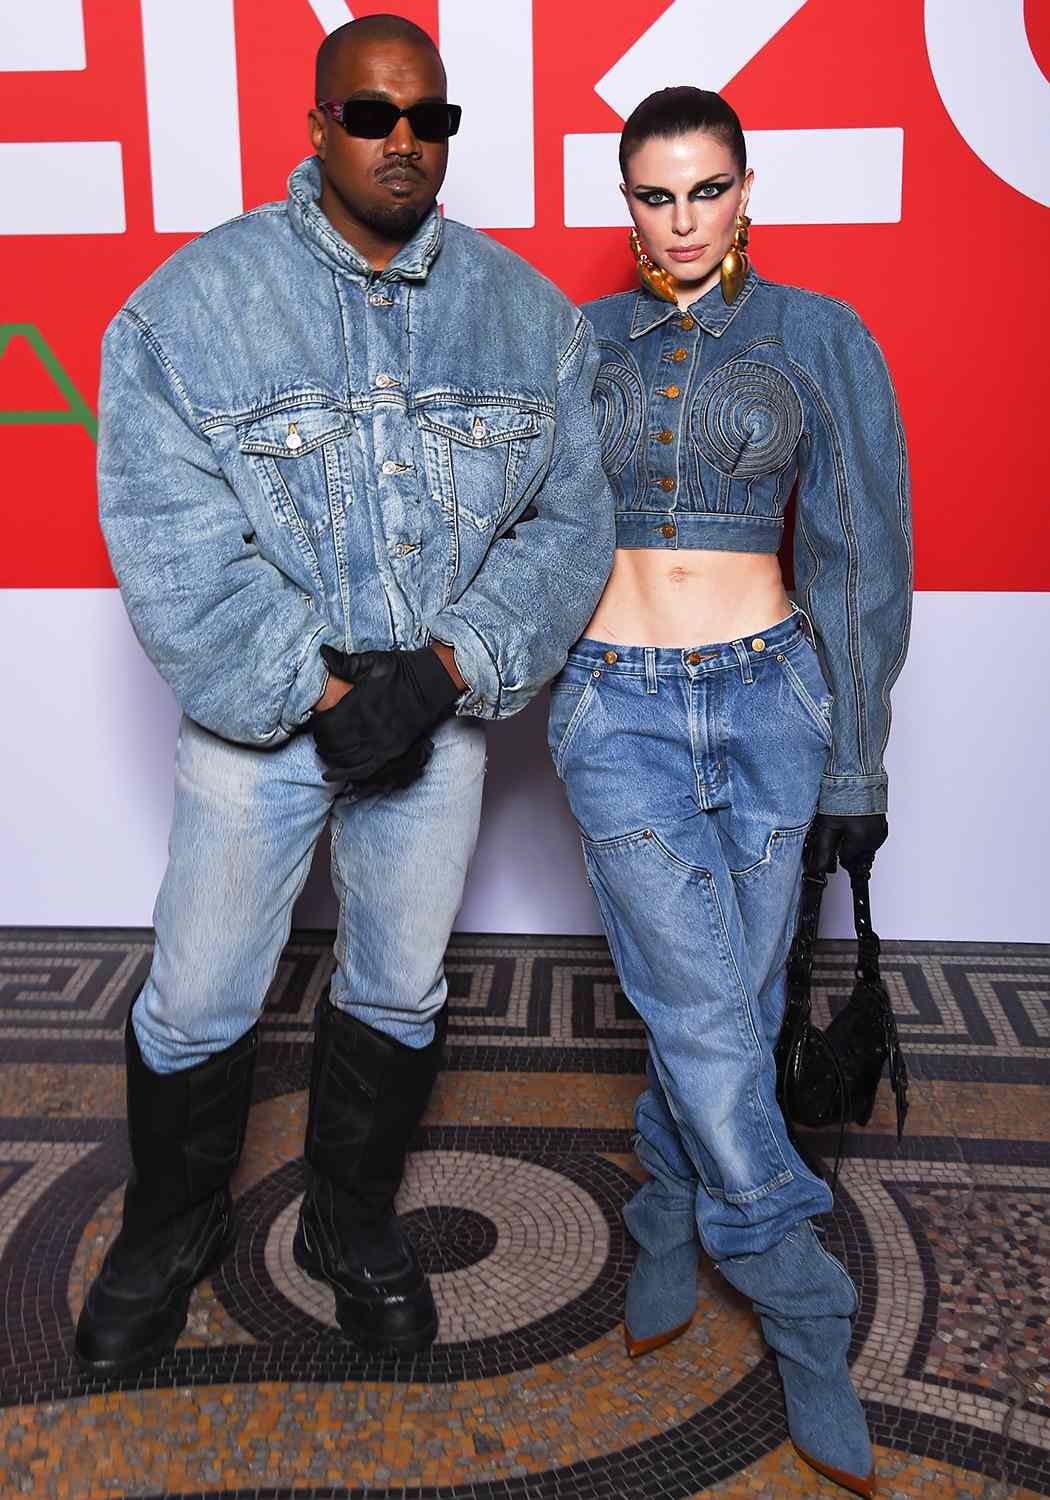 Kanye West Makes Red Carpet Debut with Julia Fox in Matching Denim | PEOPLE.com